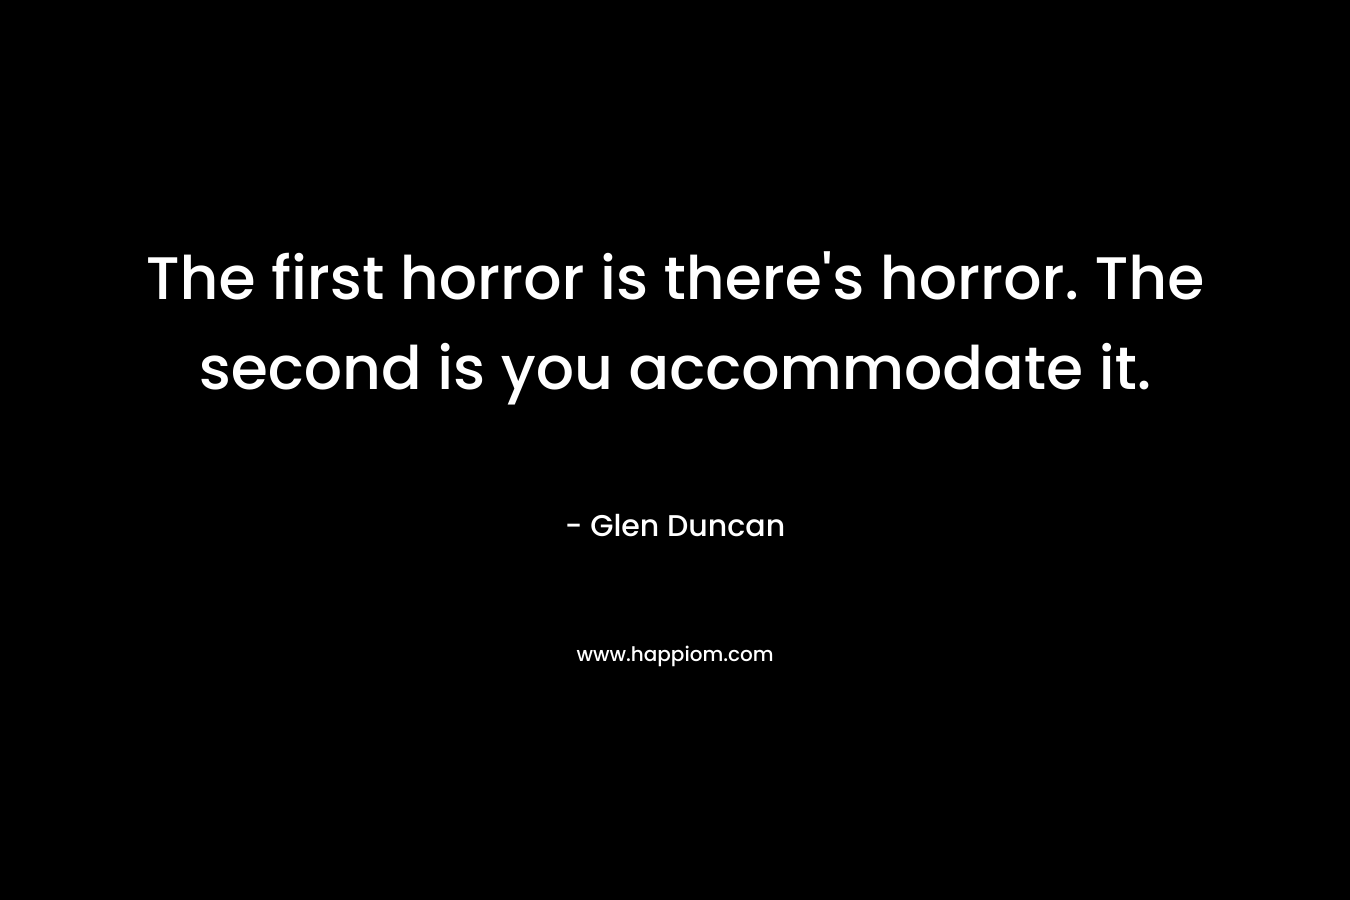 The first horror is there’s horror. The second is you accommodate it. – Glen Duncan